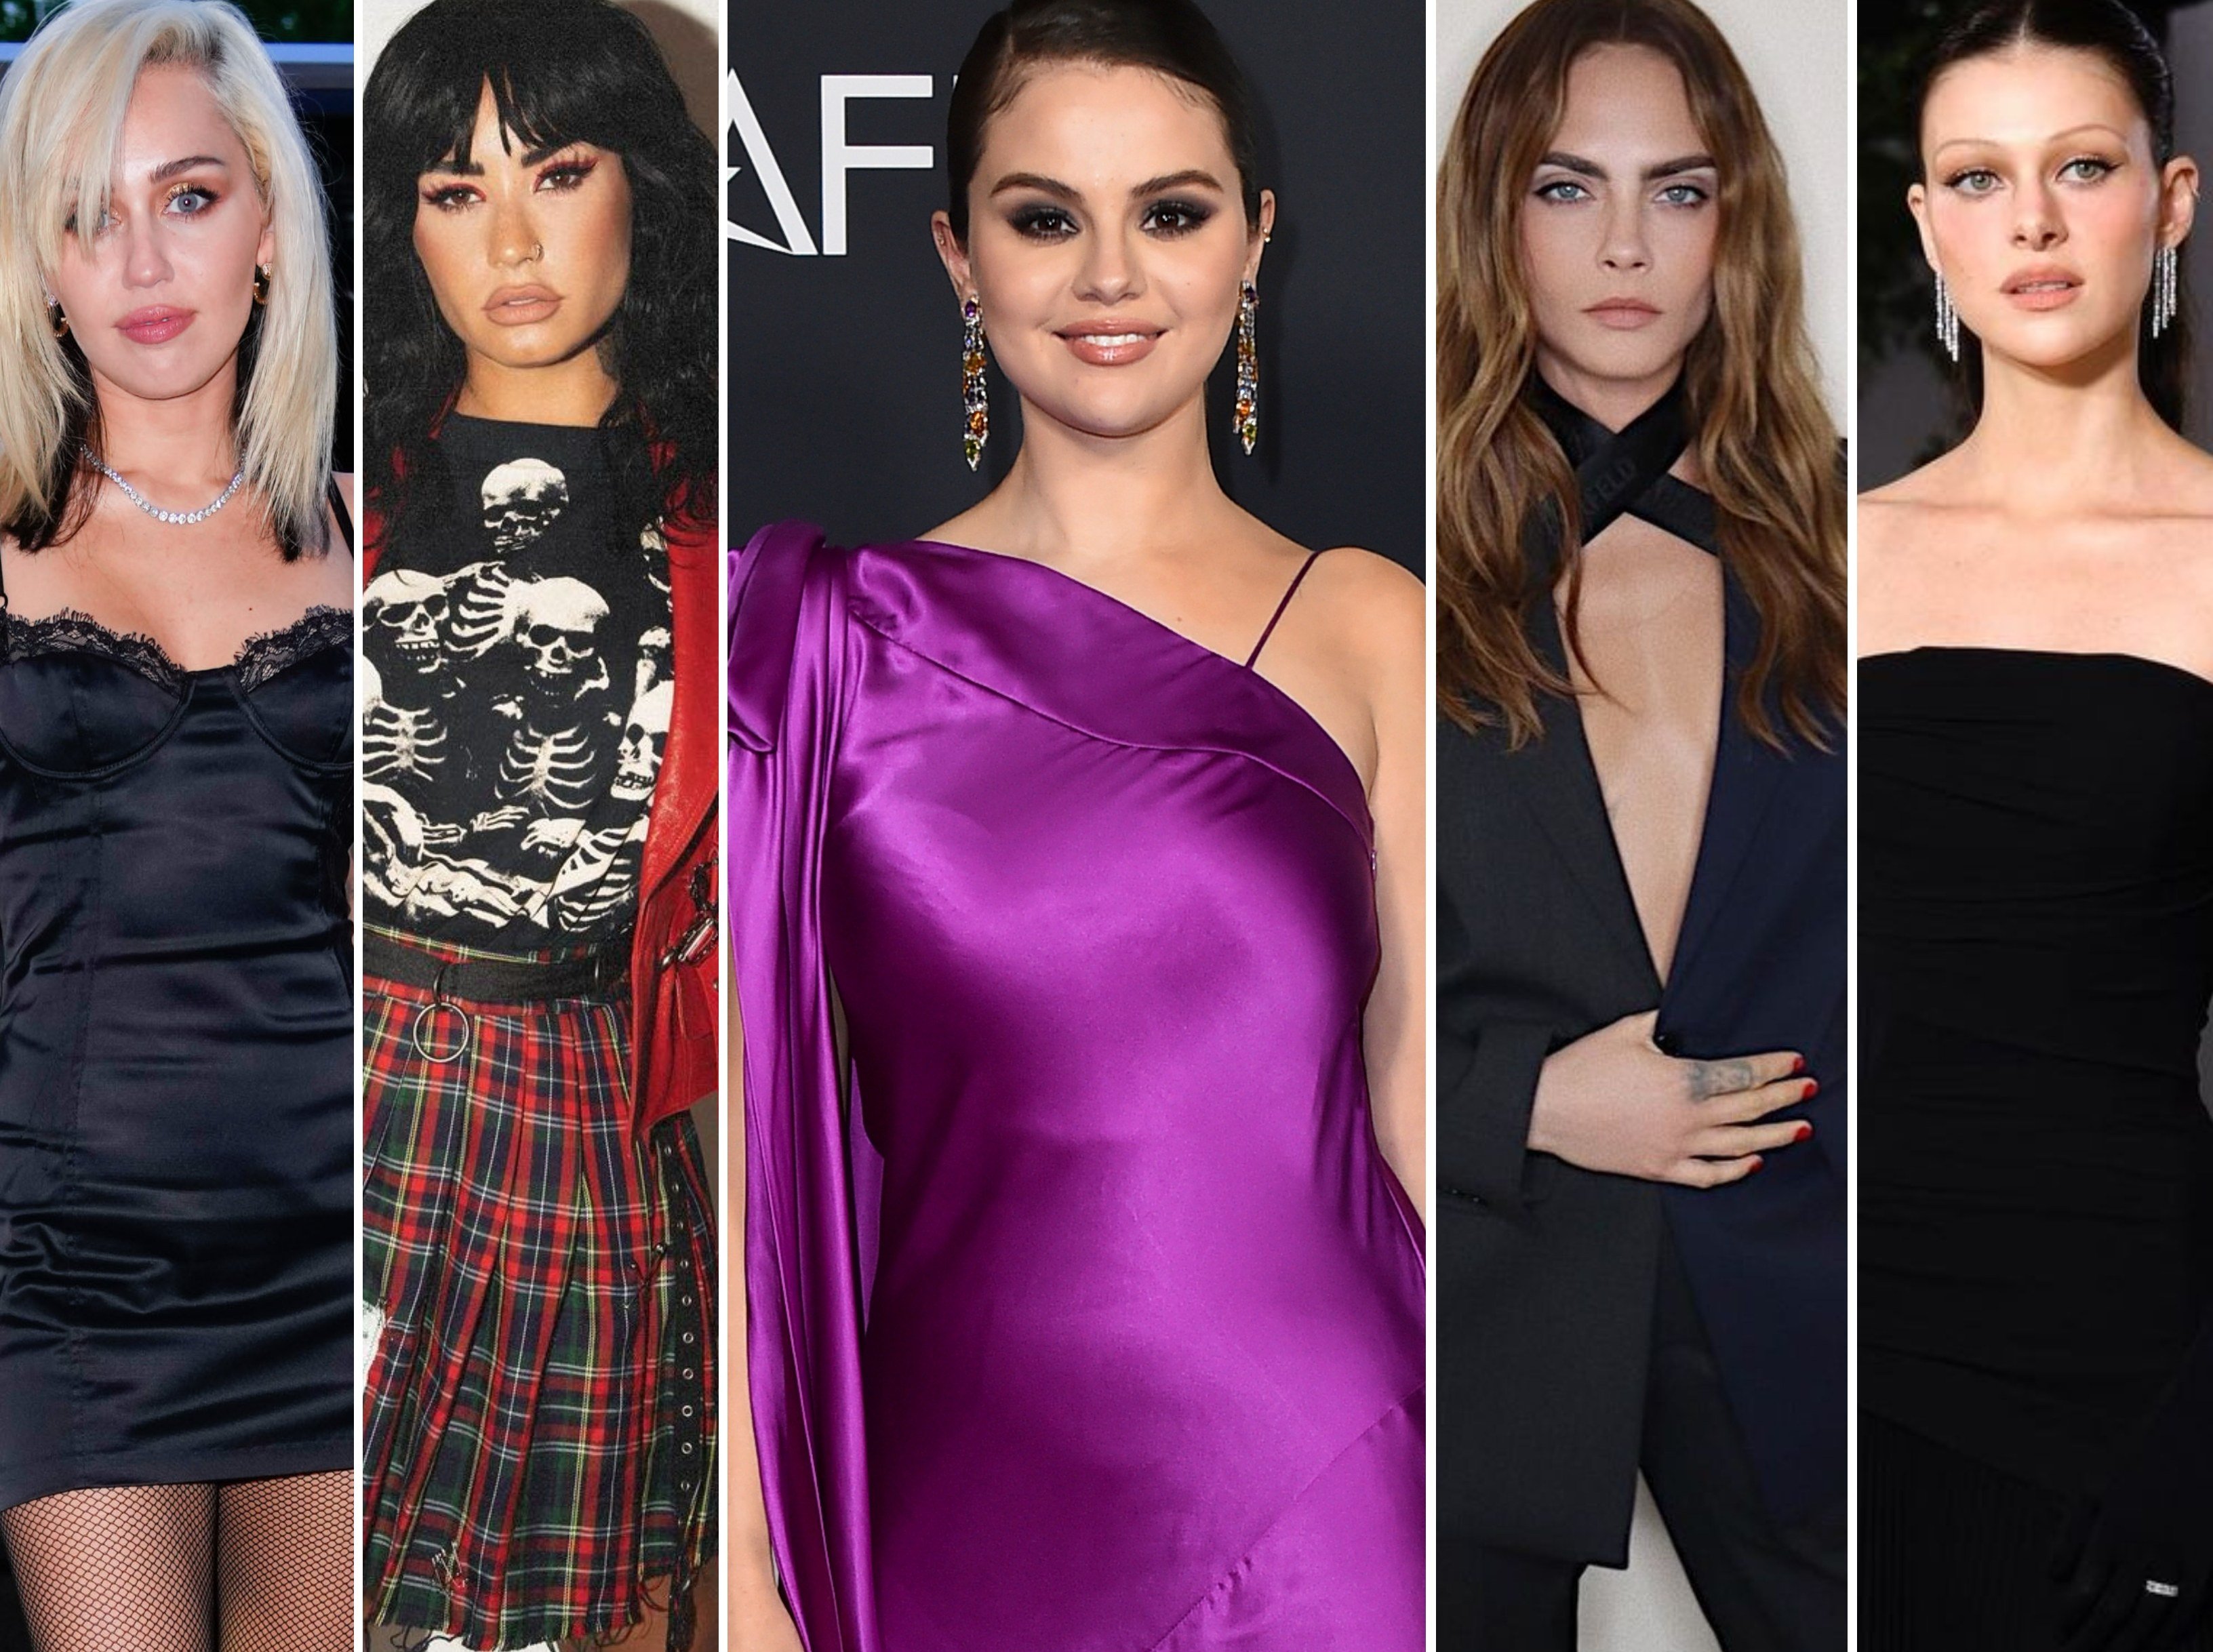 Selena Gomez has had her ups and downs of friendships, from Miley Cyrus and Demi Lovato to Cara Delevingne and Nicola Peltz. Photos: @caradelevingne, @nicolaannepeltzbeckham, @ddlovato/Instagram; GC Images; Invision/AP